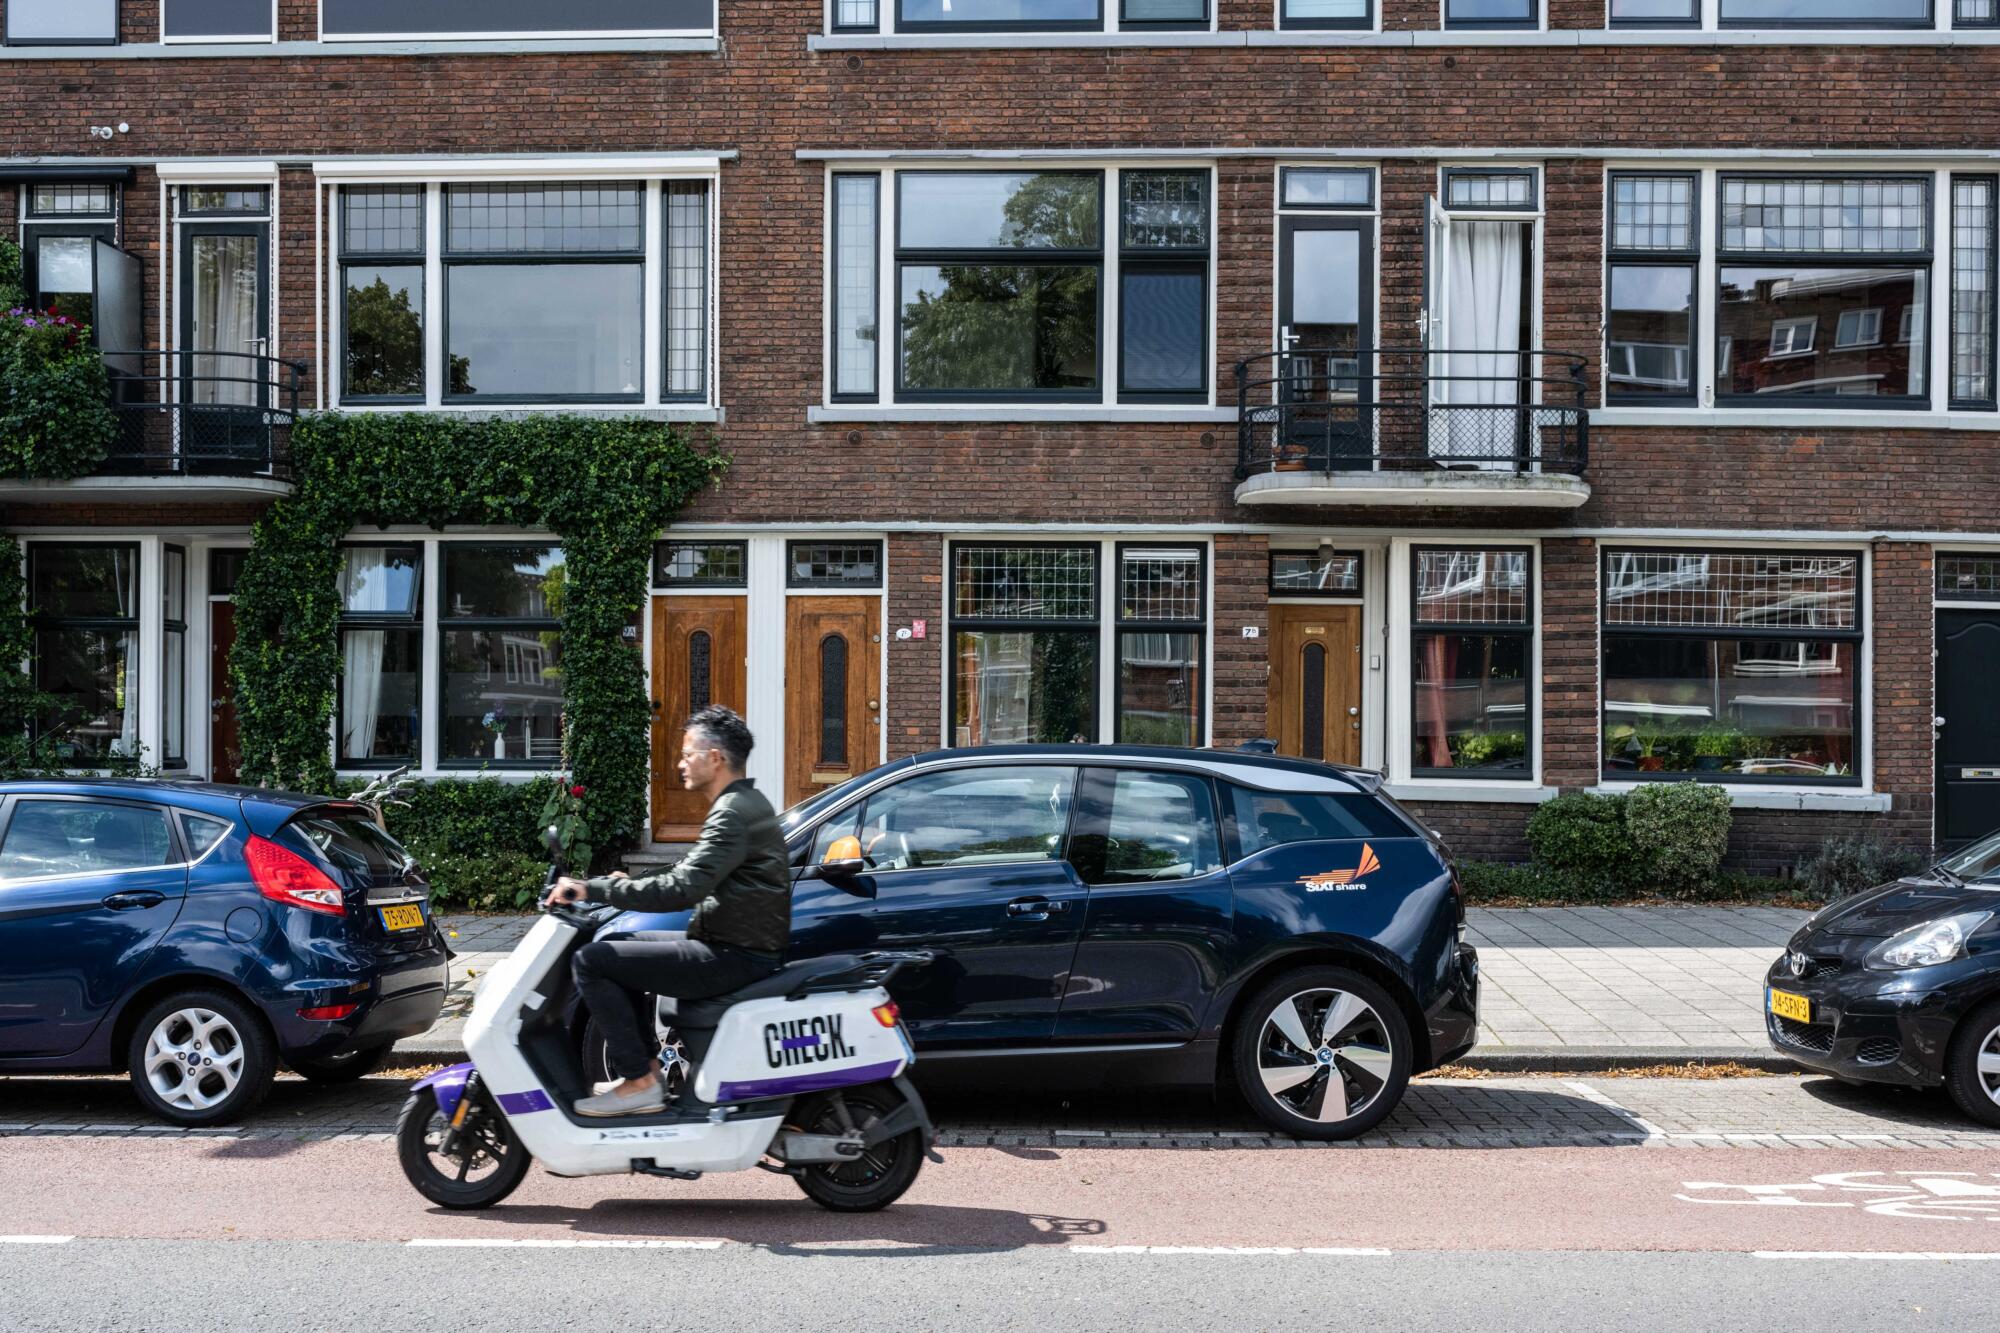 Are shared mobility solutions helping reduce CO2 emissions? MOBI-MIX investigates